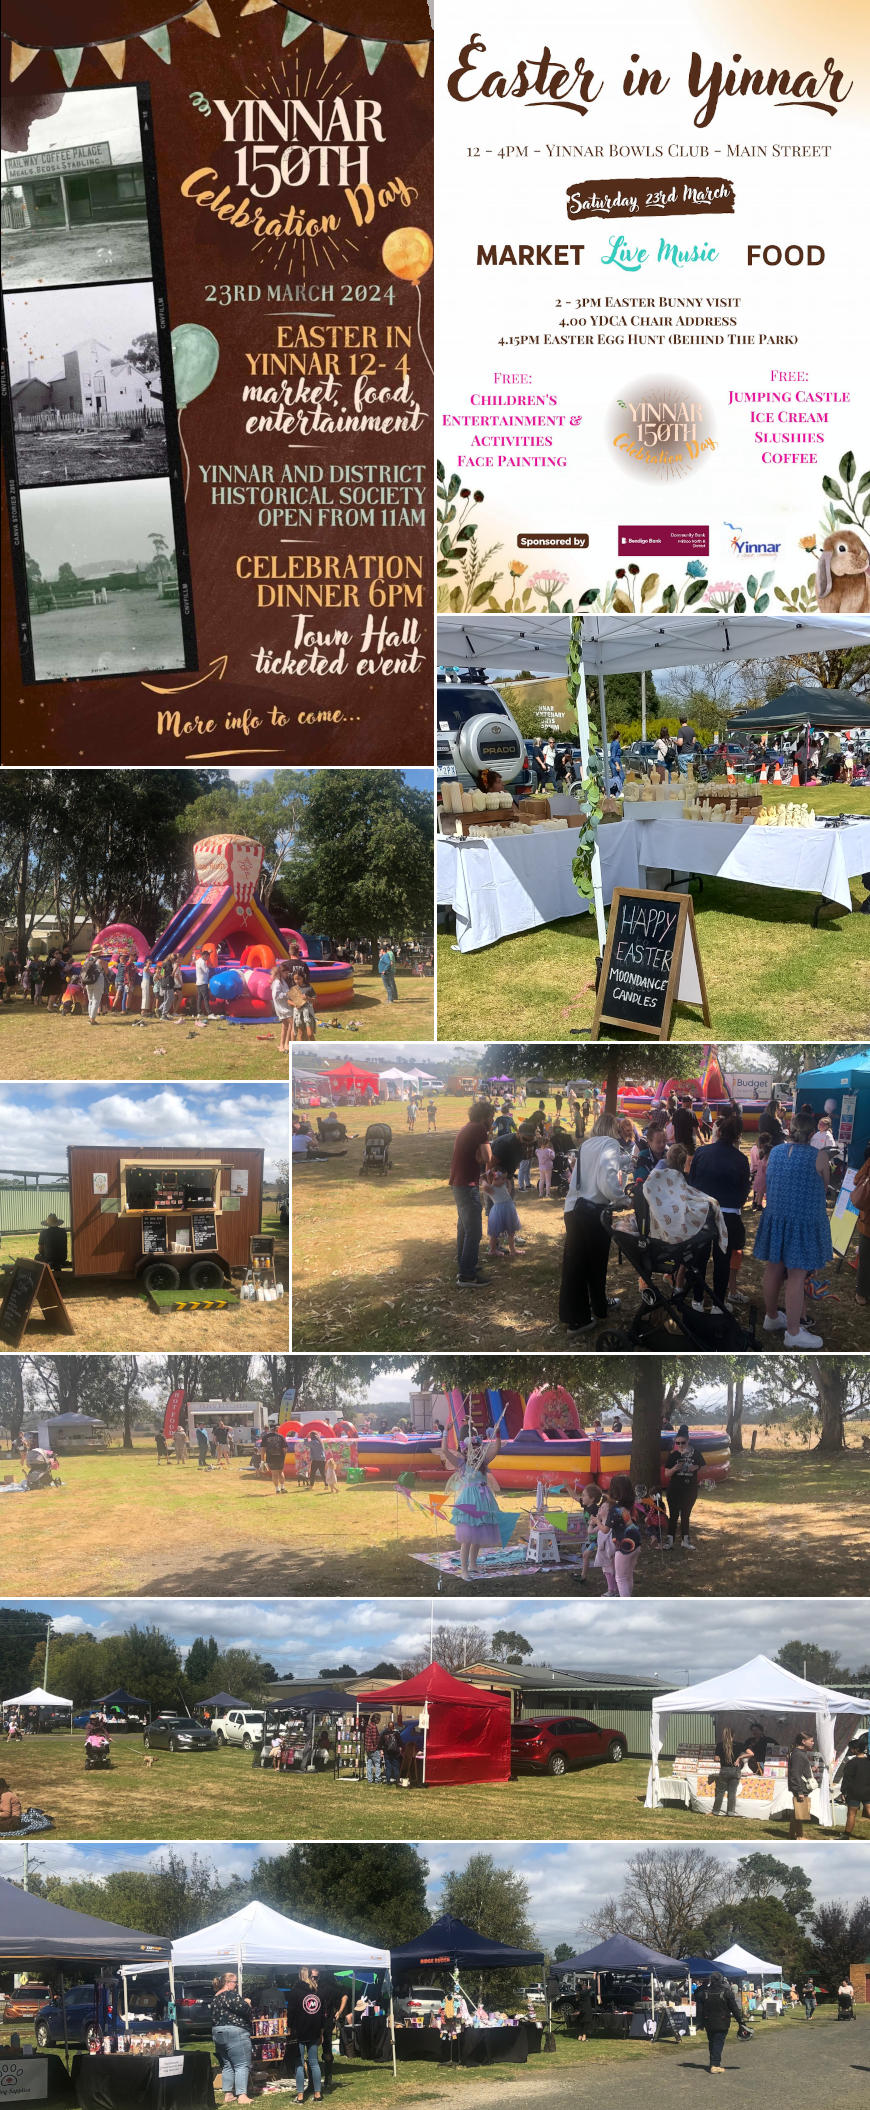 Collage of stalls and attractions for the fair